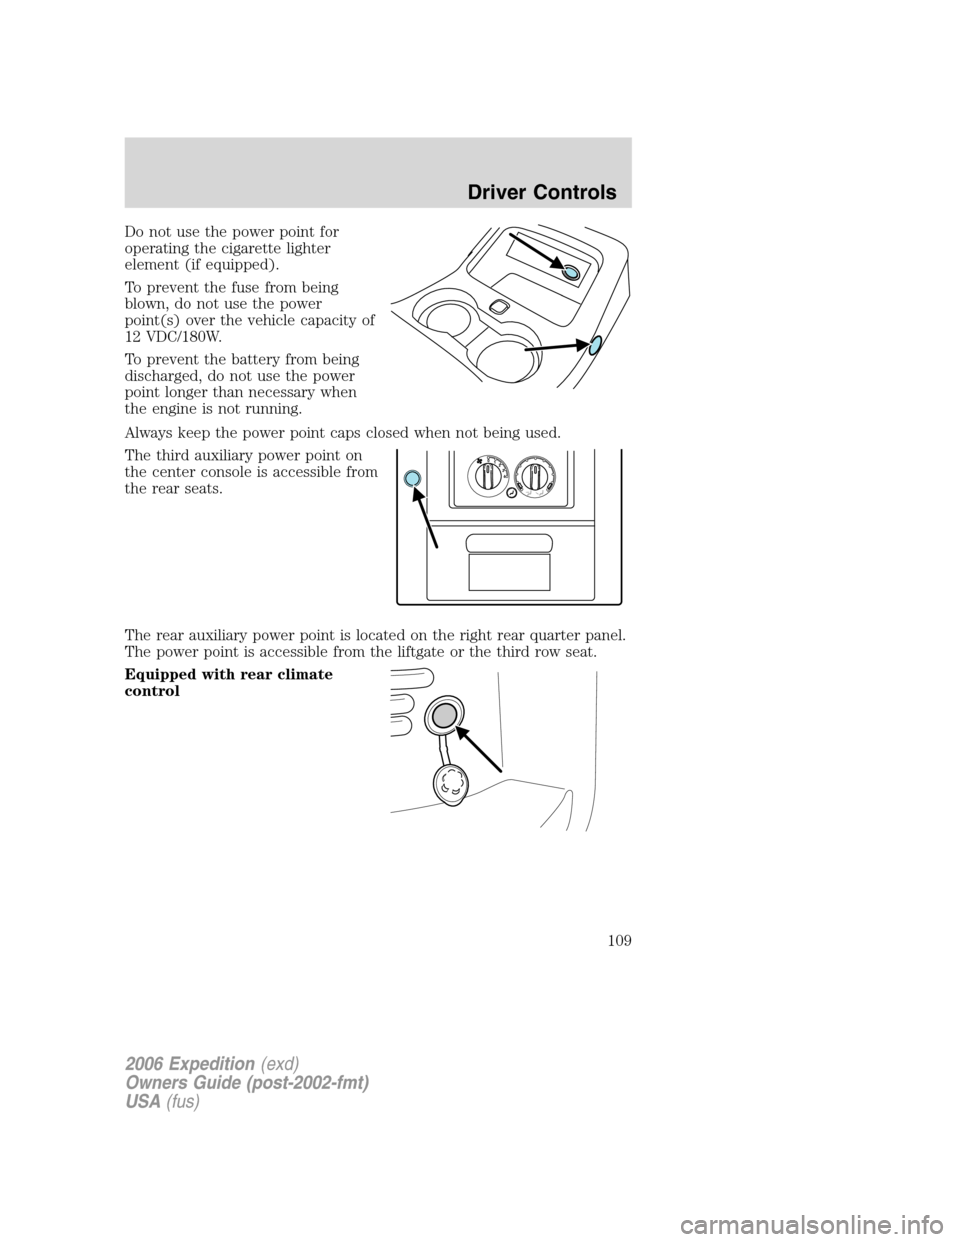 FORD EXPEDITION 2006 2.G User Guide Do not use the power point for
operating the cigarette lighter
element (if equipped).
To prevent the fuse from being
blown, do not use the power
point(s) over the vehicle capacity of
12 VDC/180W.
To p